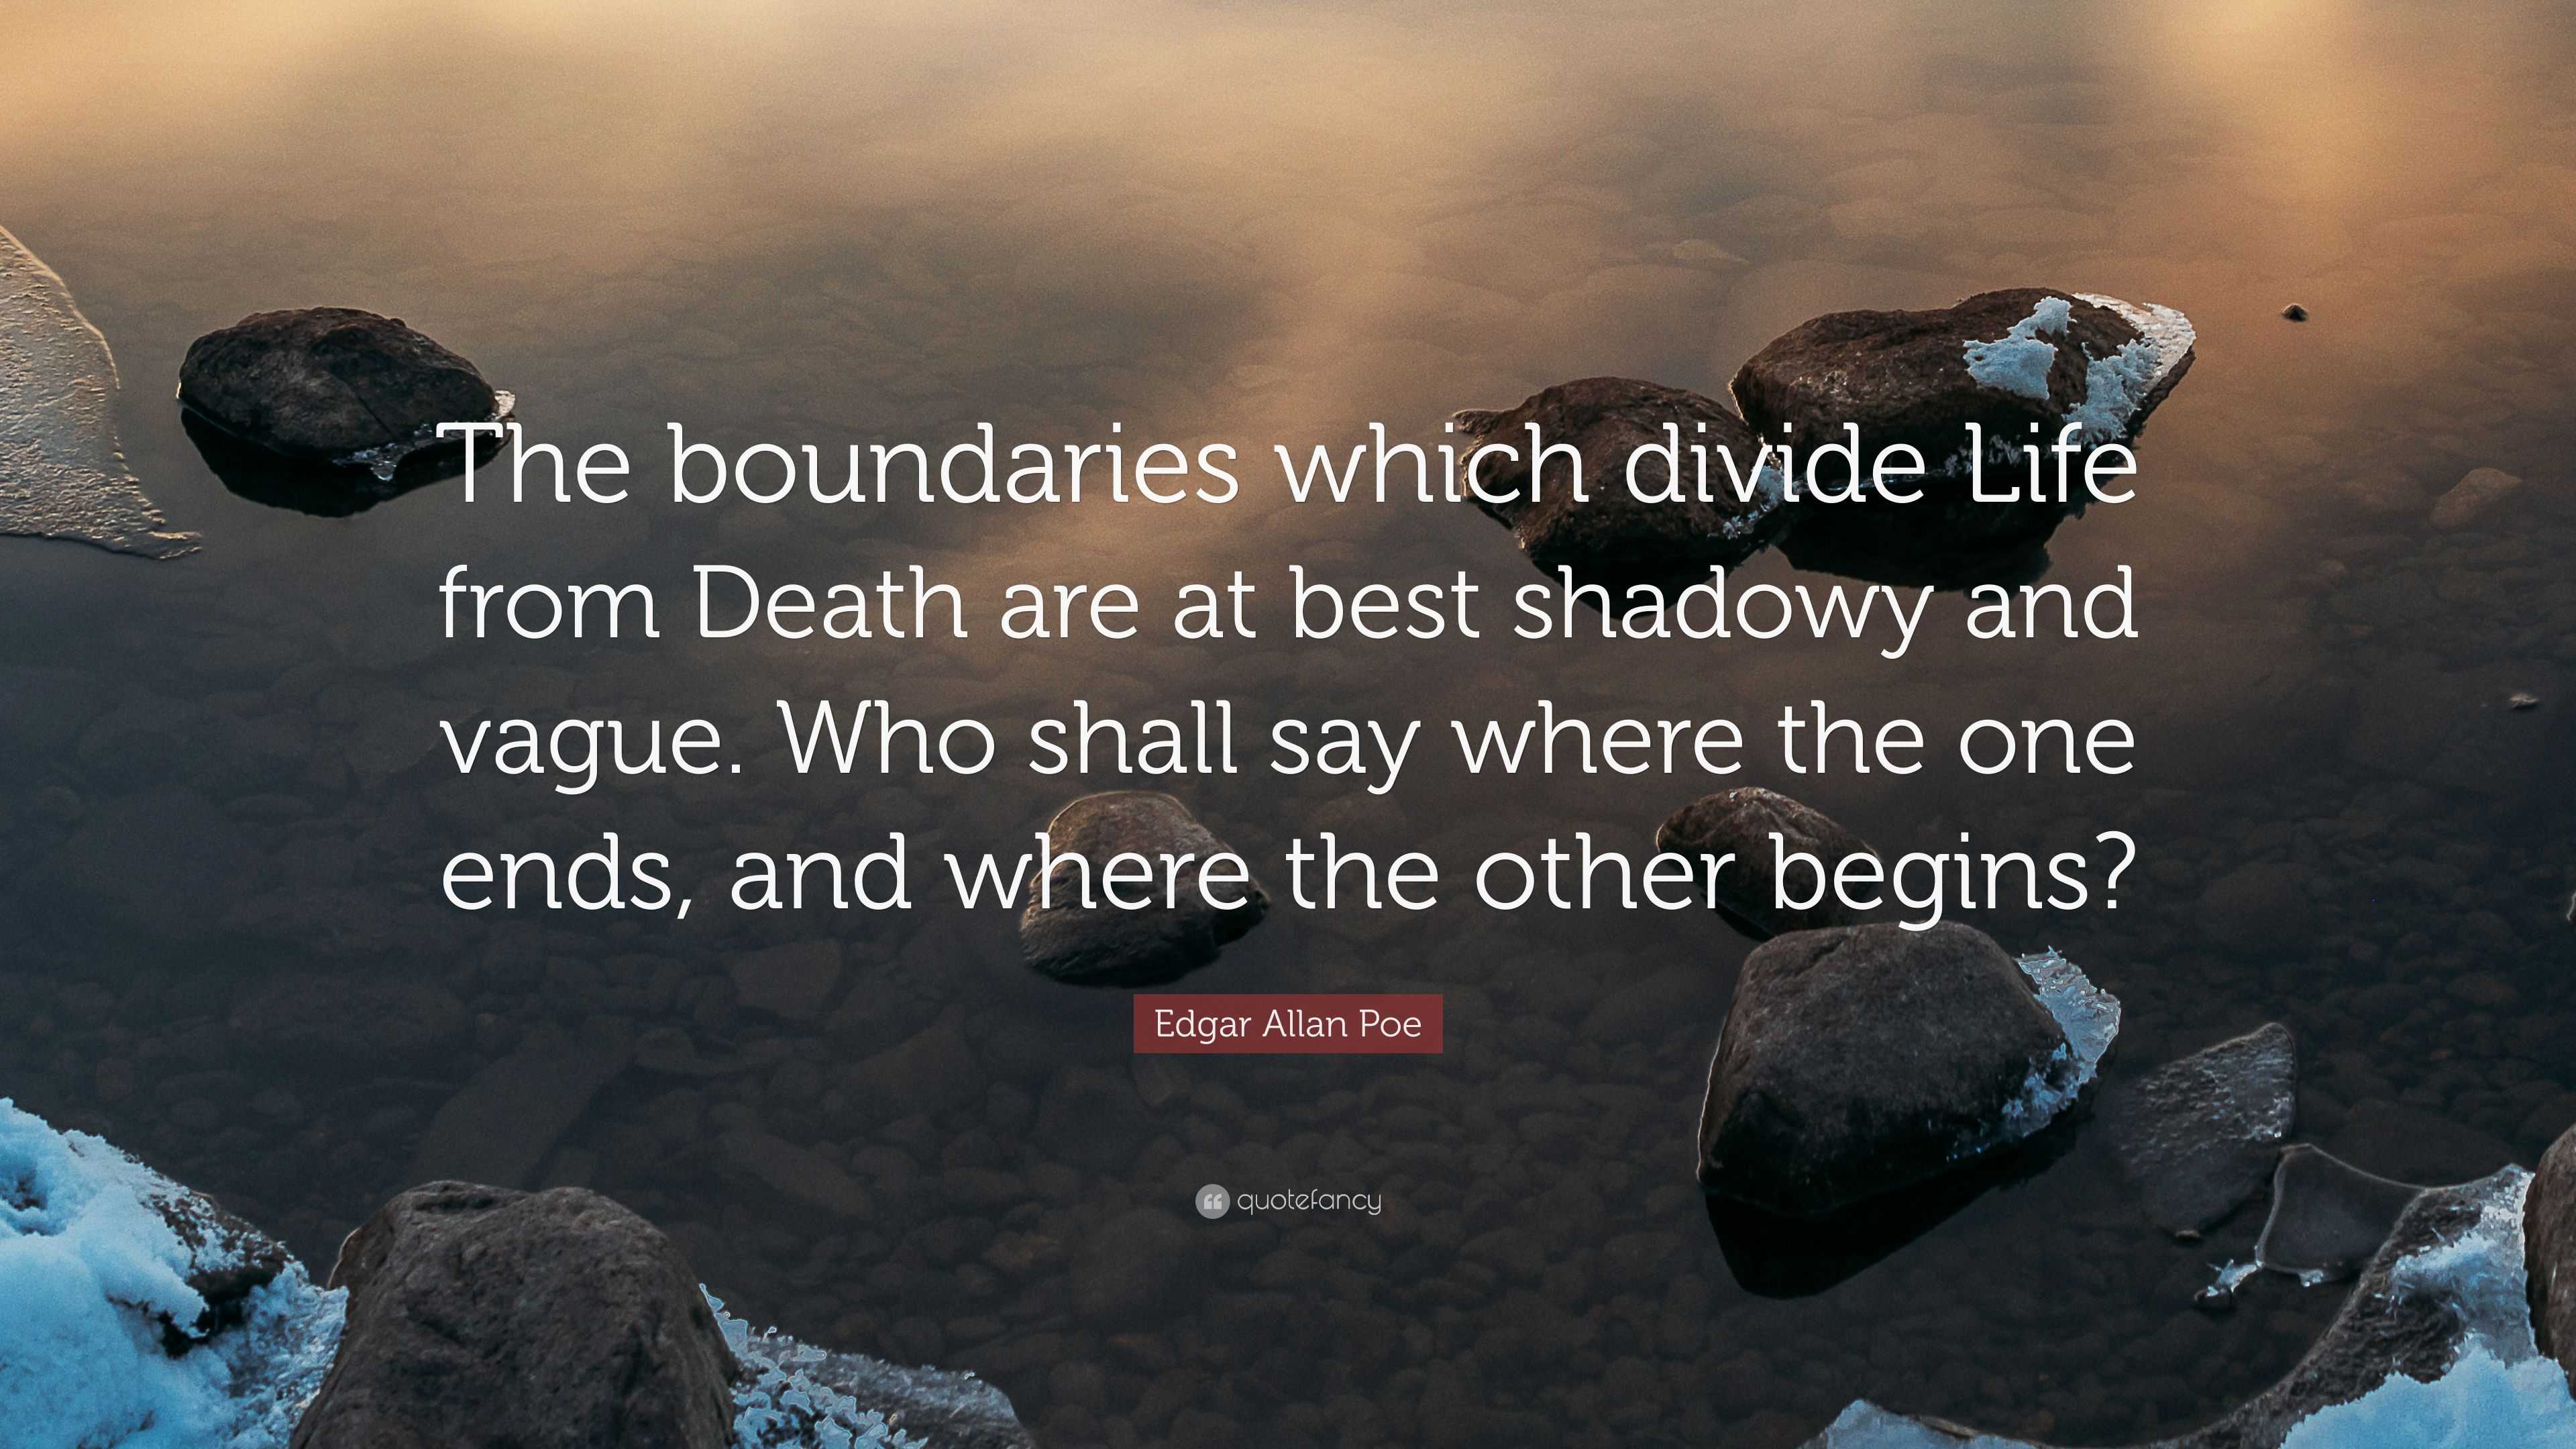 Edgar Allan Poe Quote “The boundaries which divide Life from Death are at best